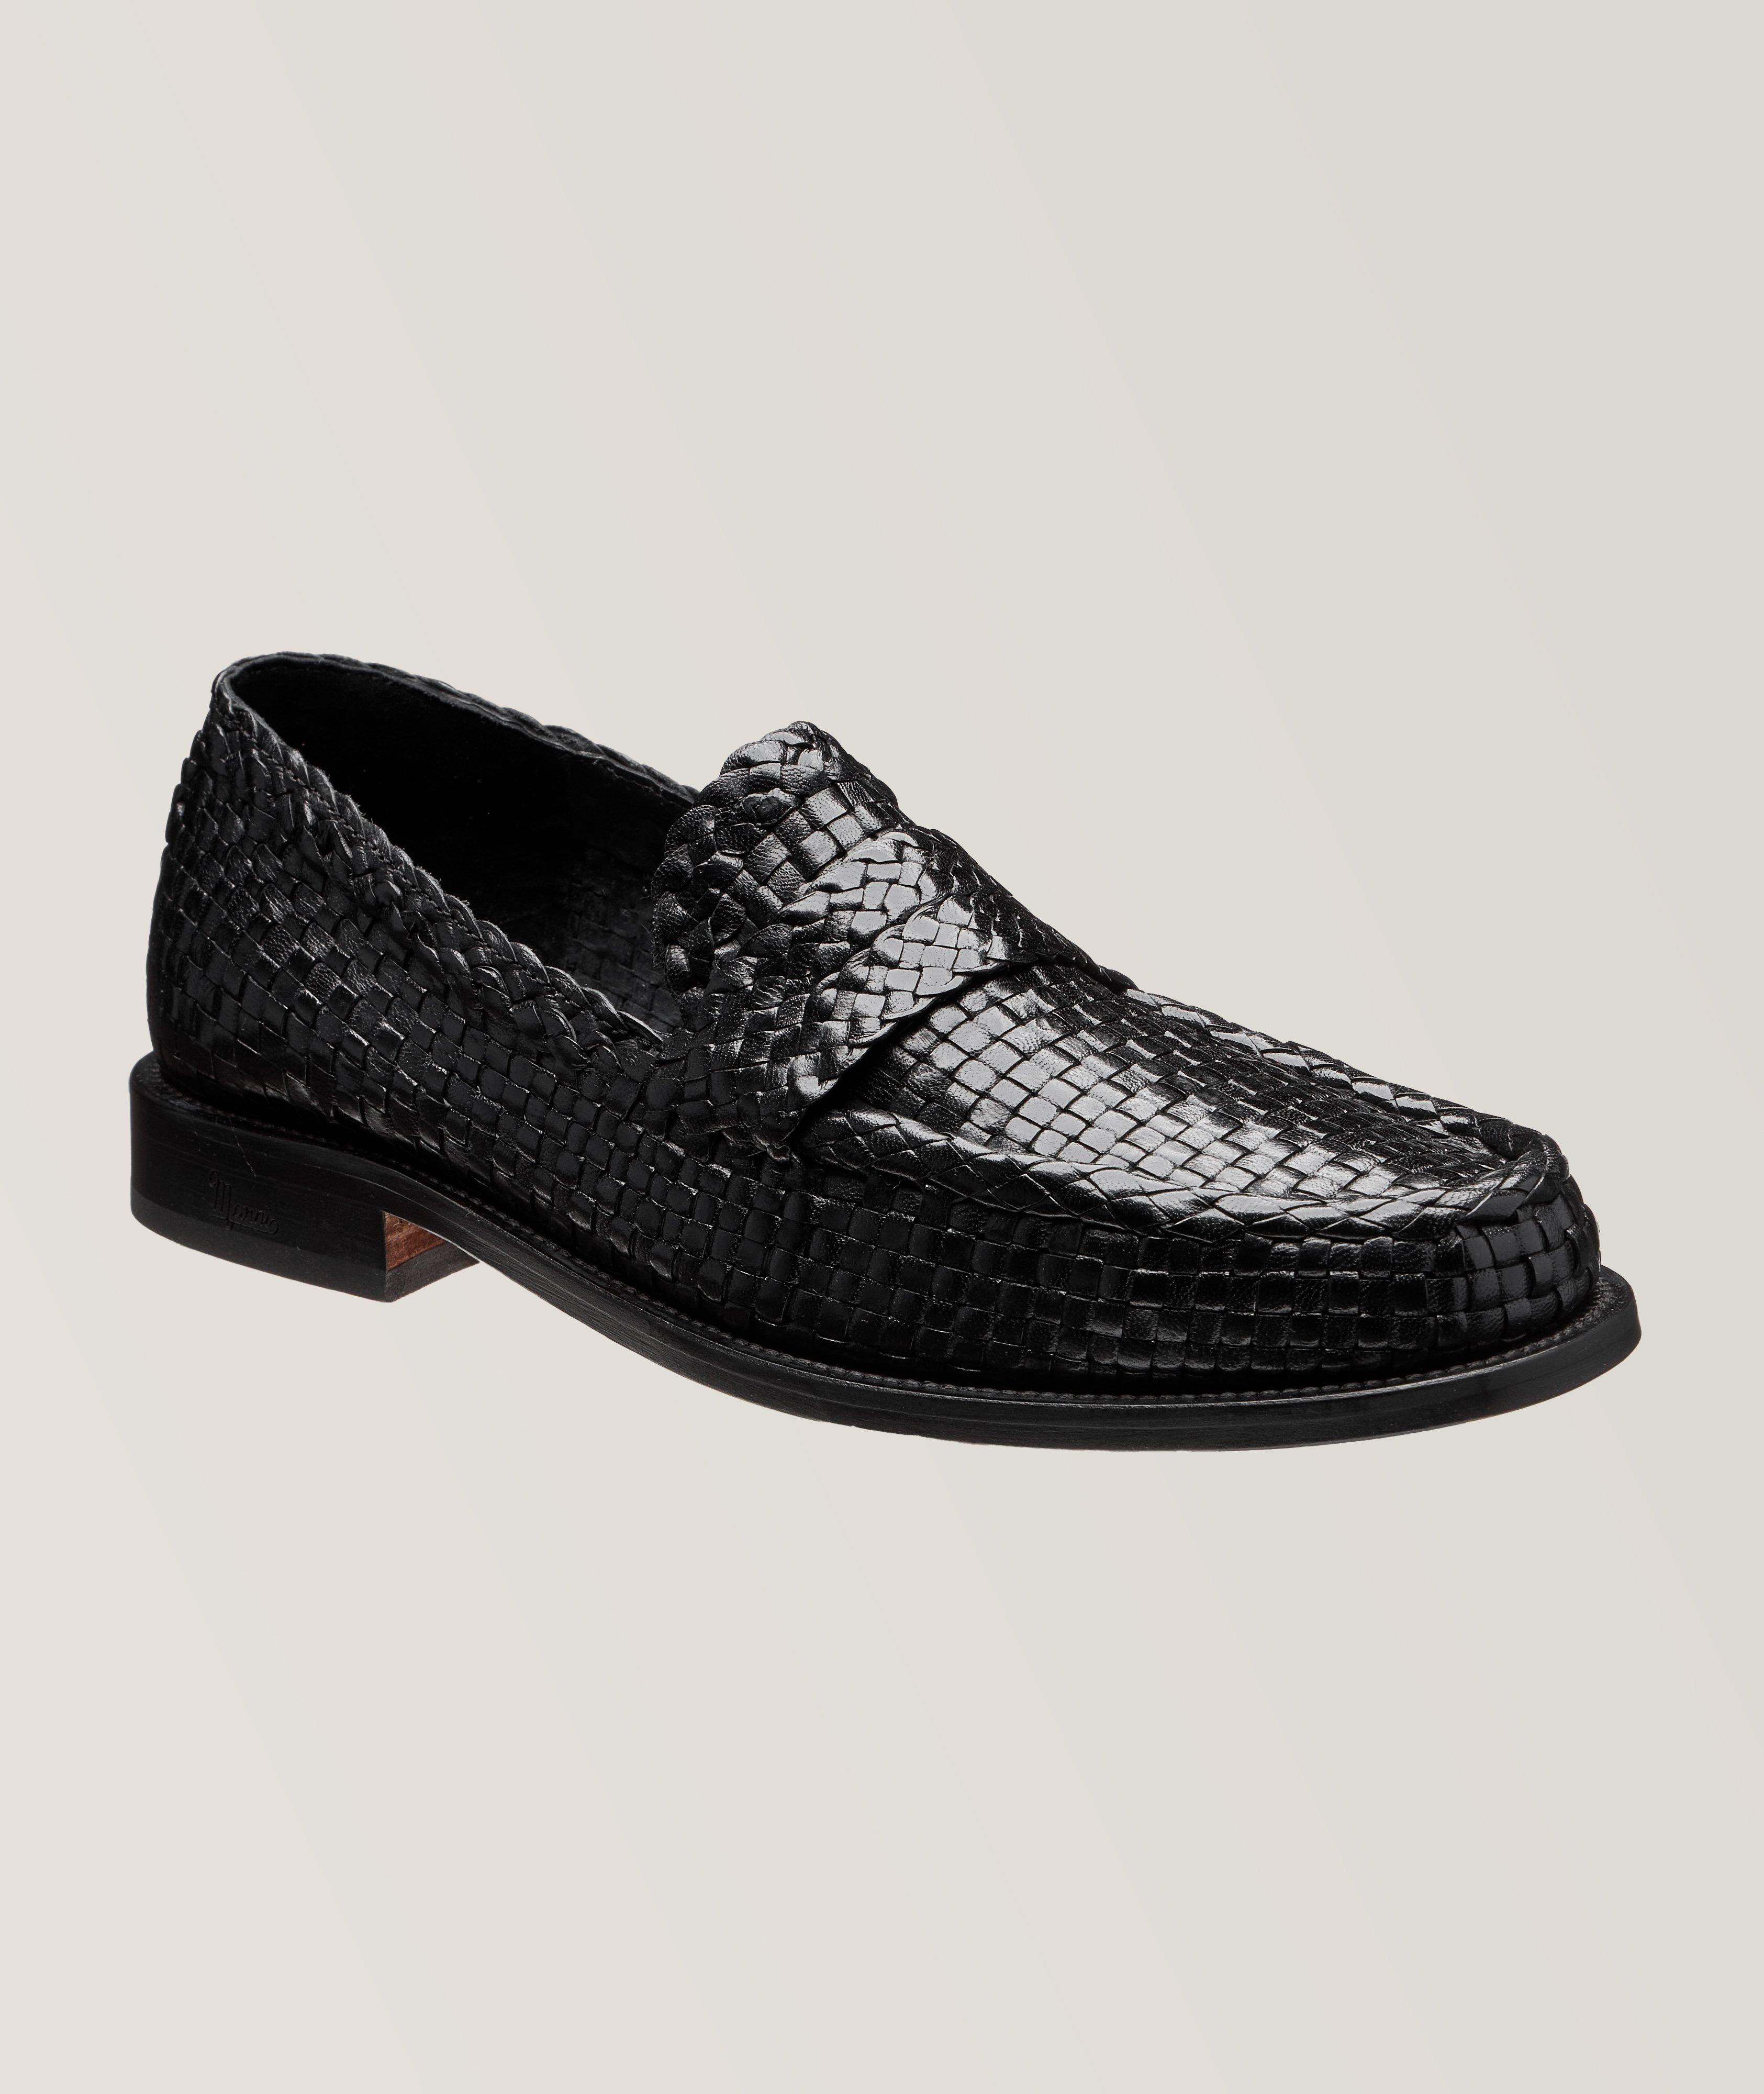 Woven Leather Loafers image 0